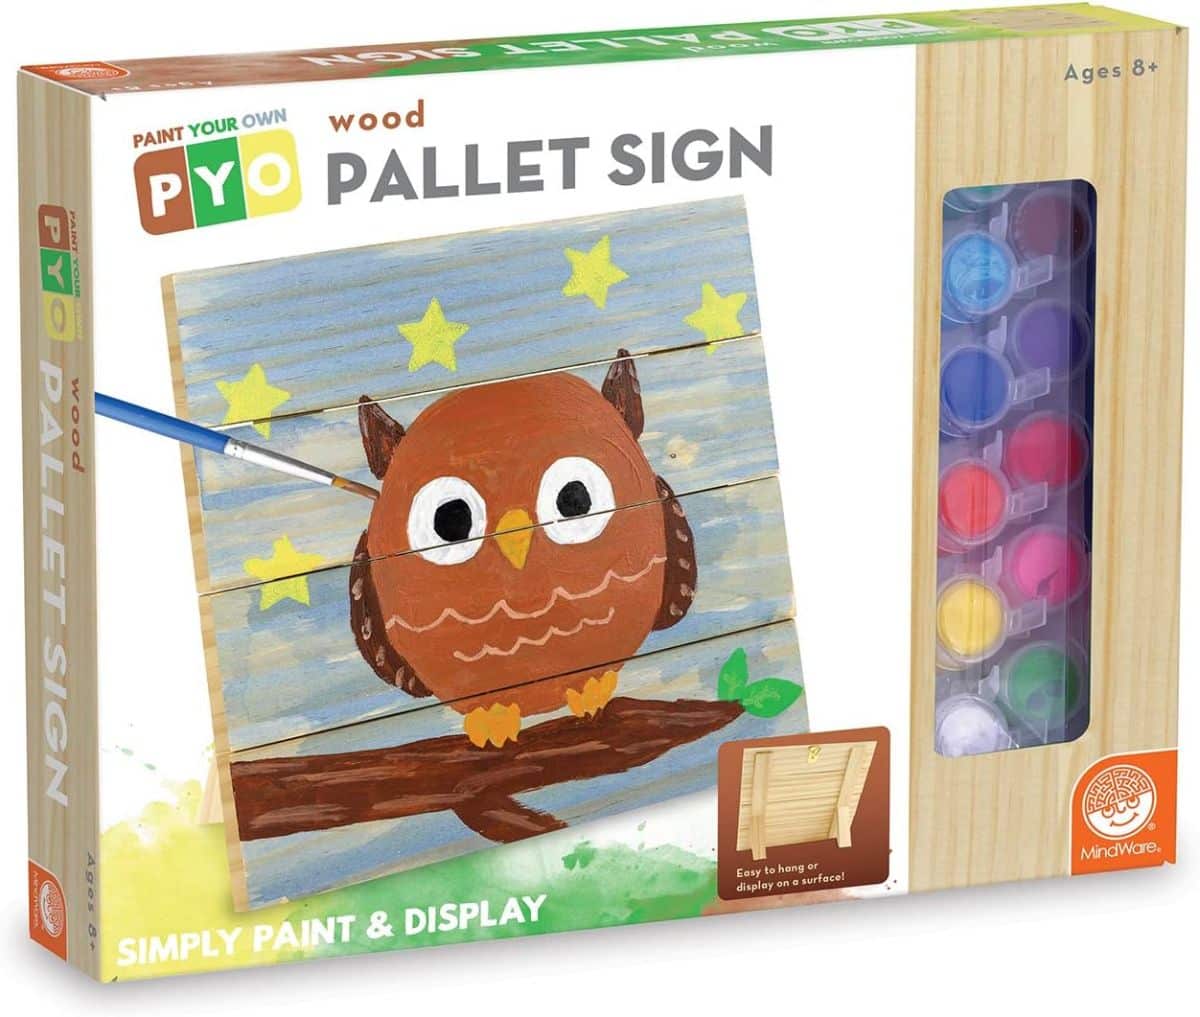 Paint Your Own Wood Pallet Sign Kit